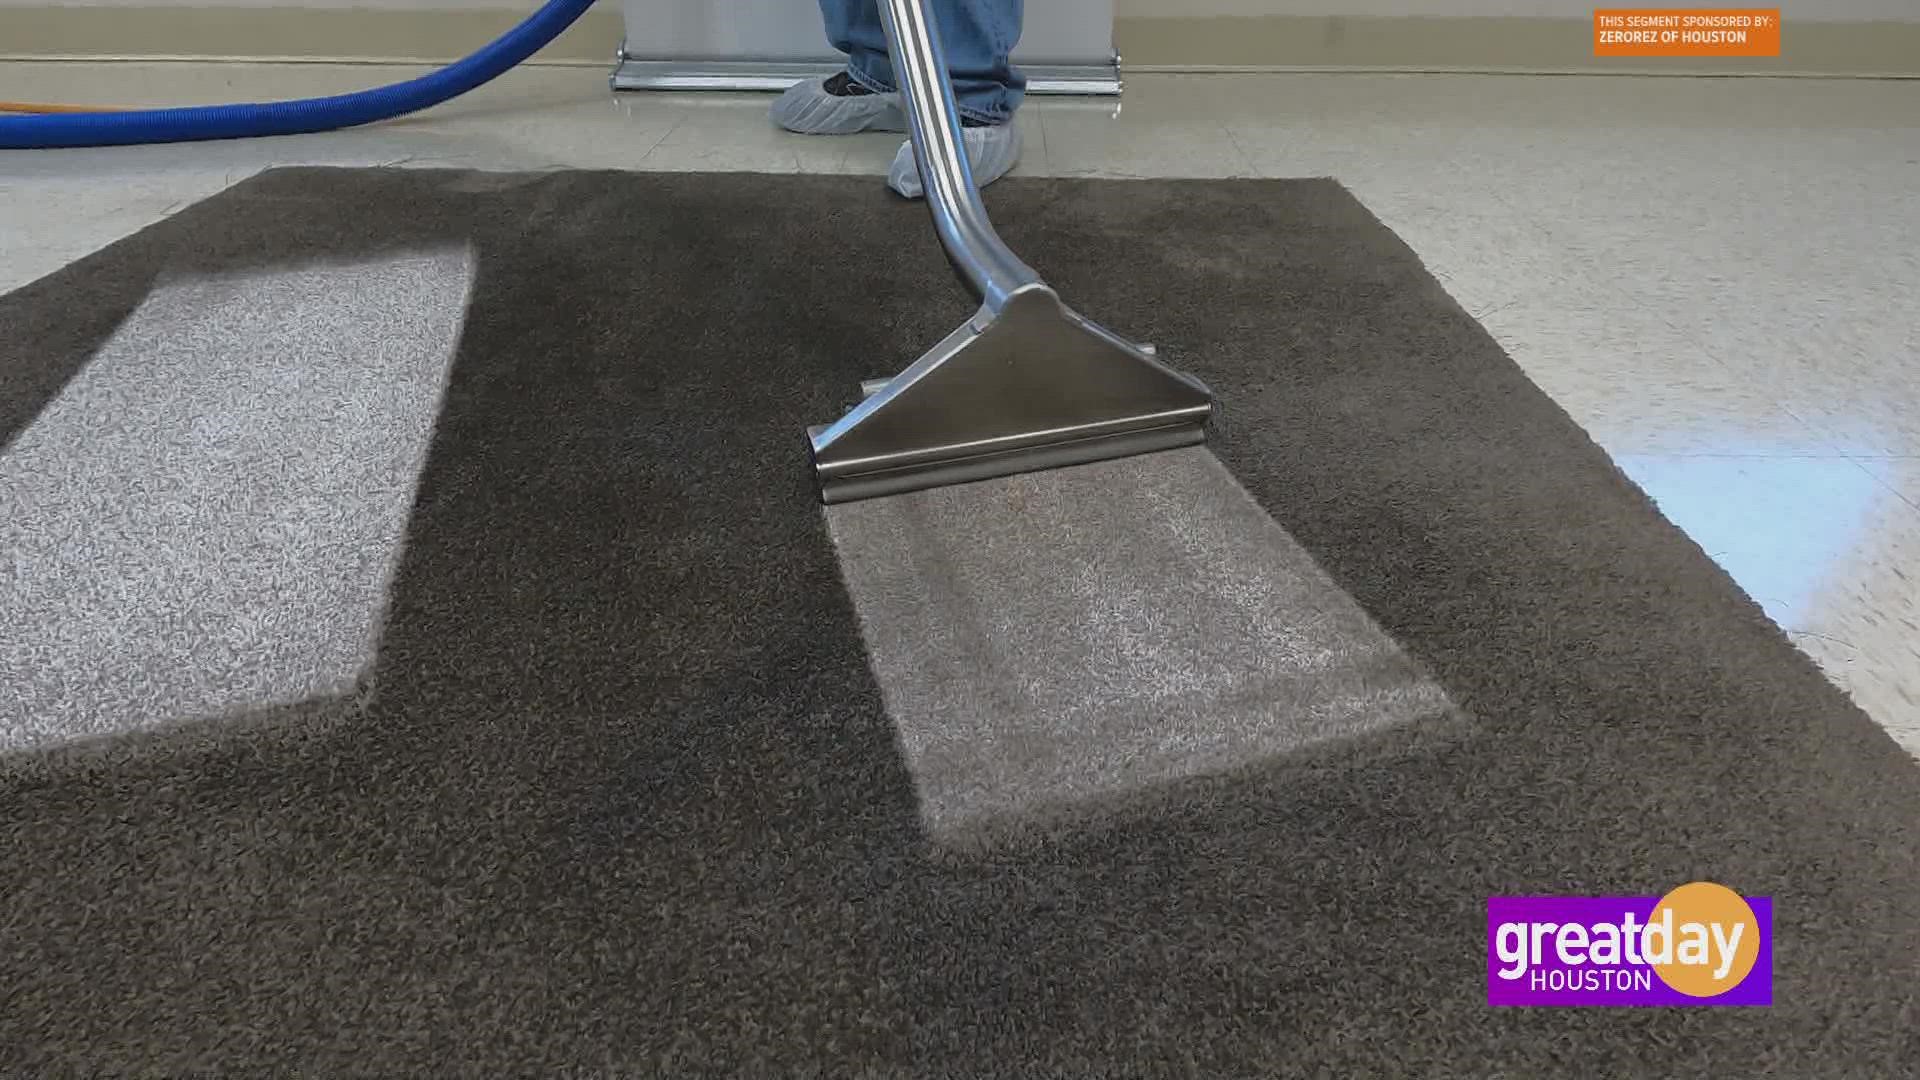 Kyle Peterson, General Manager of Zerorez of Houston, shares how Zerorez can clean your floors without any toxic chemicals or detergents